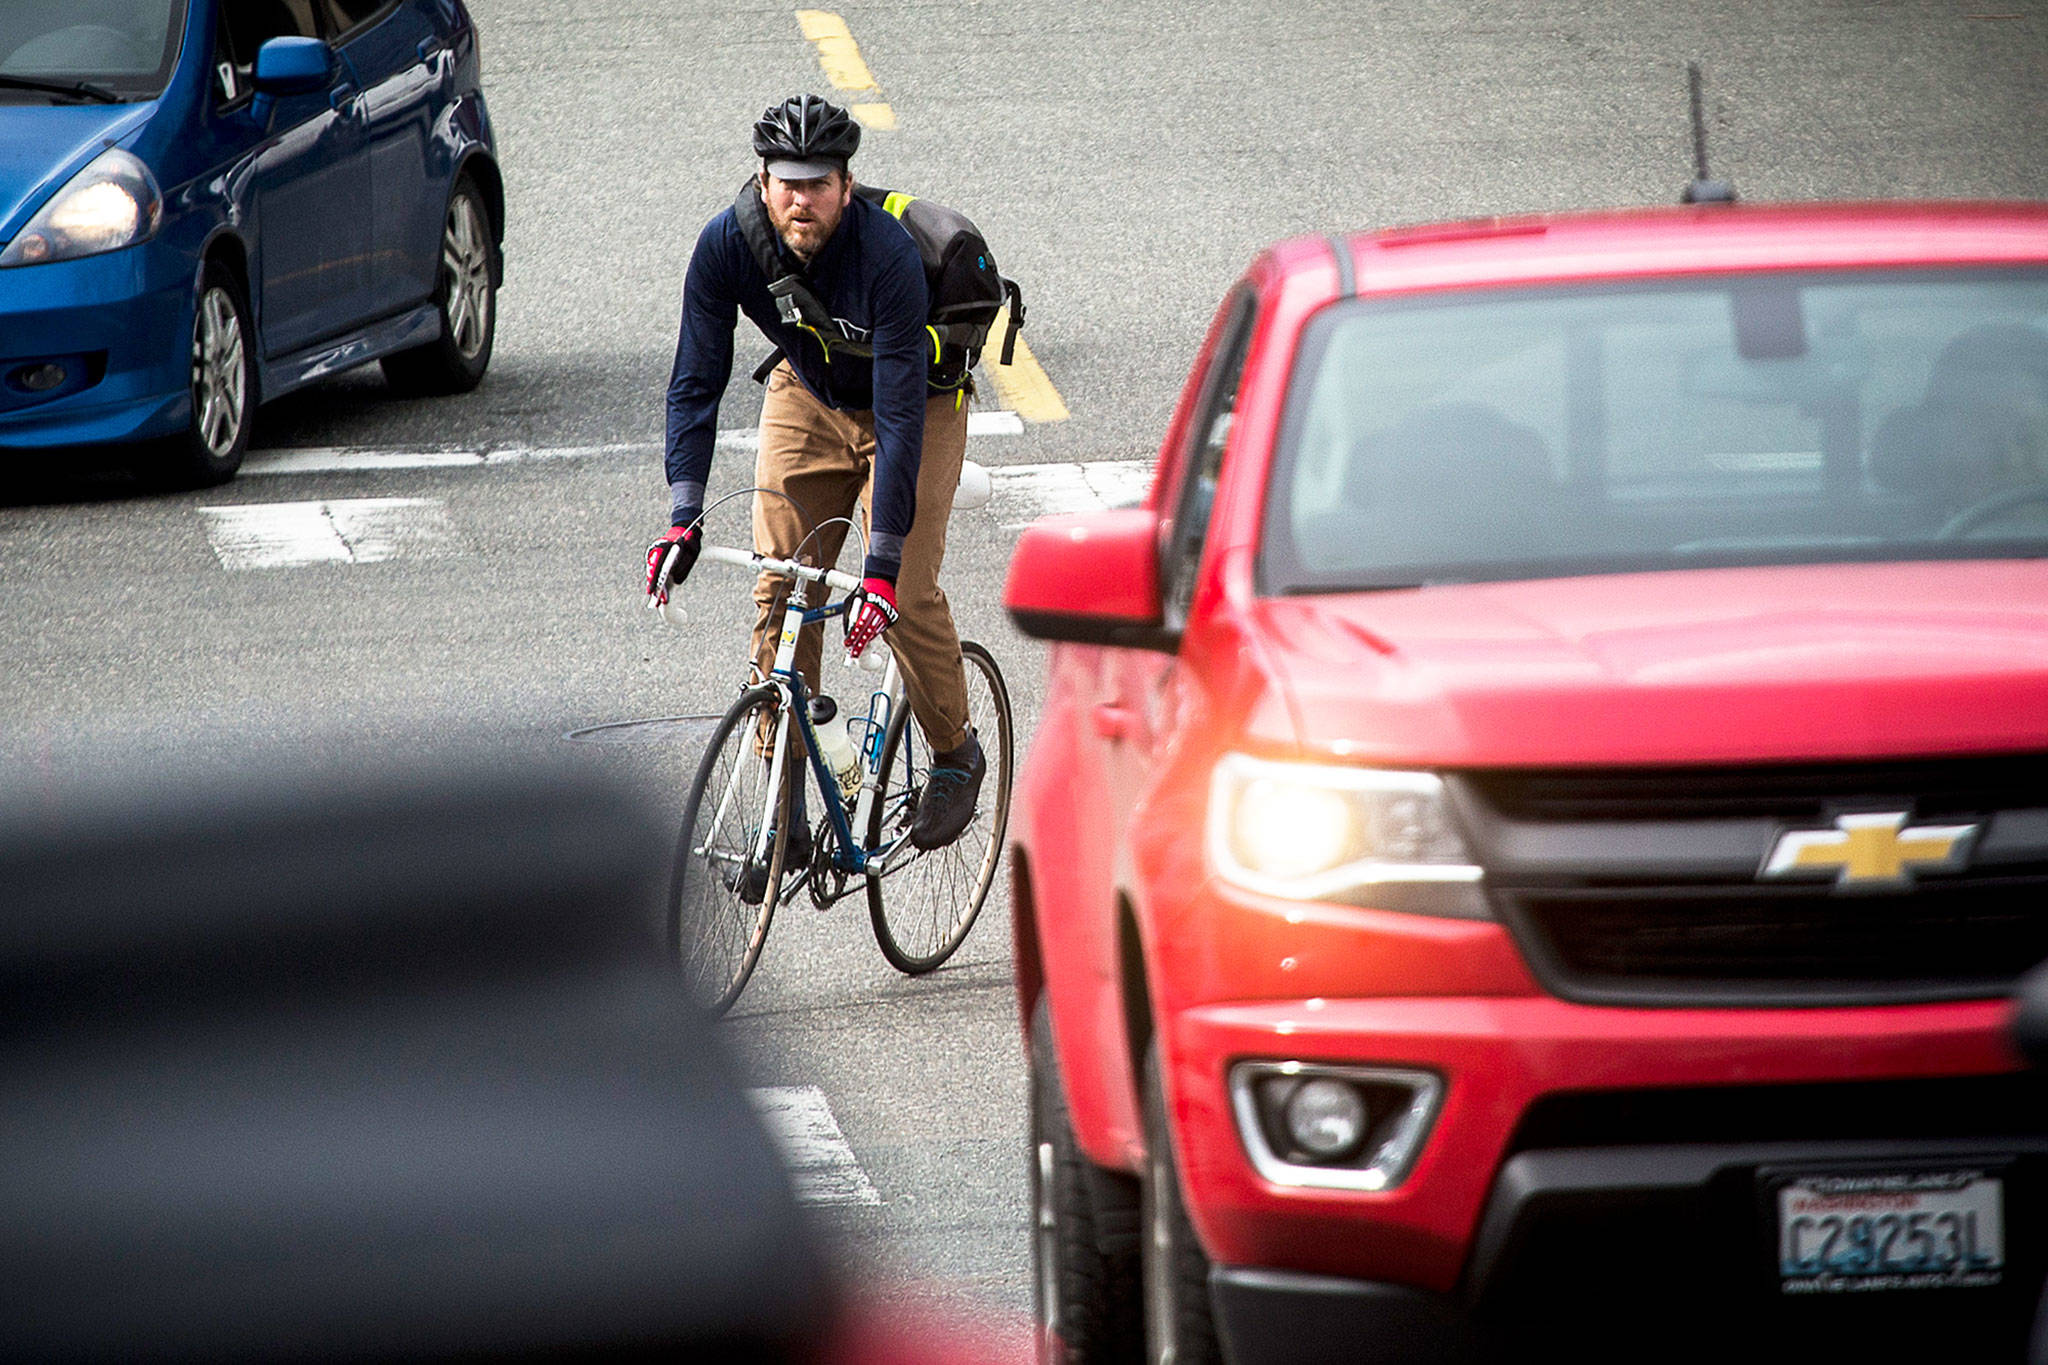 REI presents a “Urban Cycling 101” webinar with Ecology Action May 4 via Zoom. Warland Hewitt Wight is shown riding through traffic in Everett. (Ian Terry / Herald file)